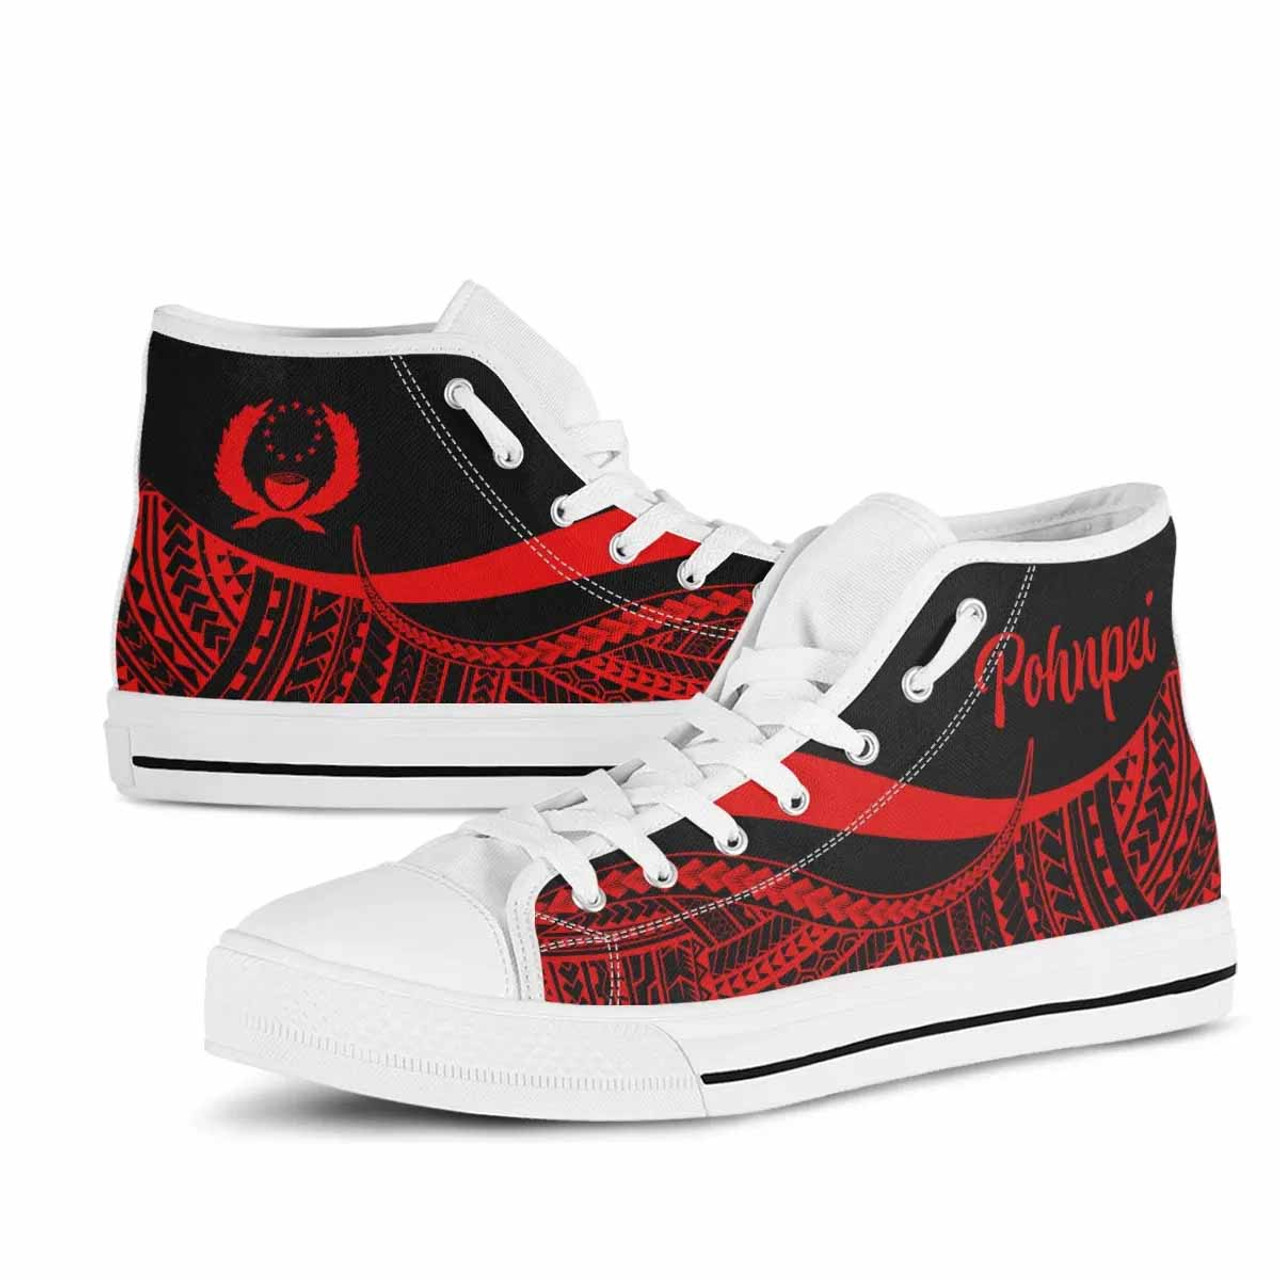 Pohnpei High Top Shoes Red - Polynesian Tentacle Tribal Pattern 8